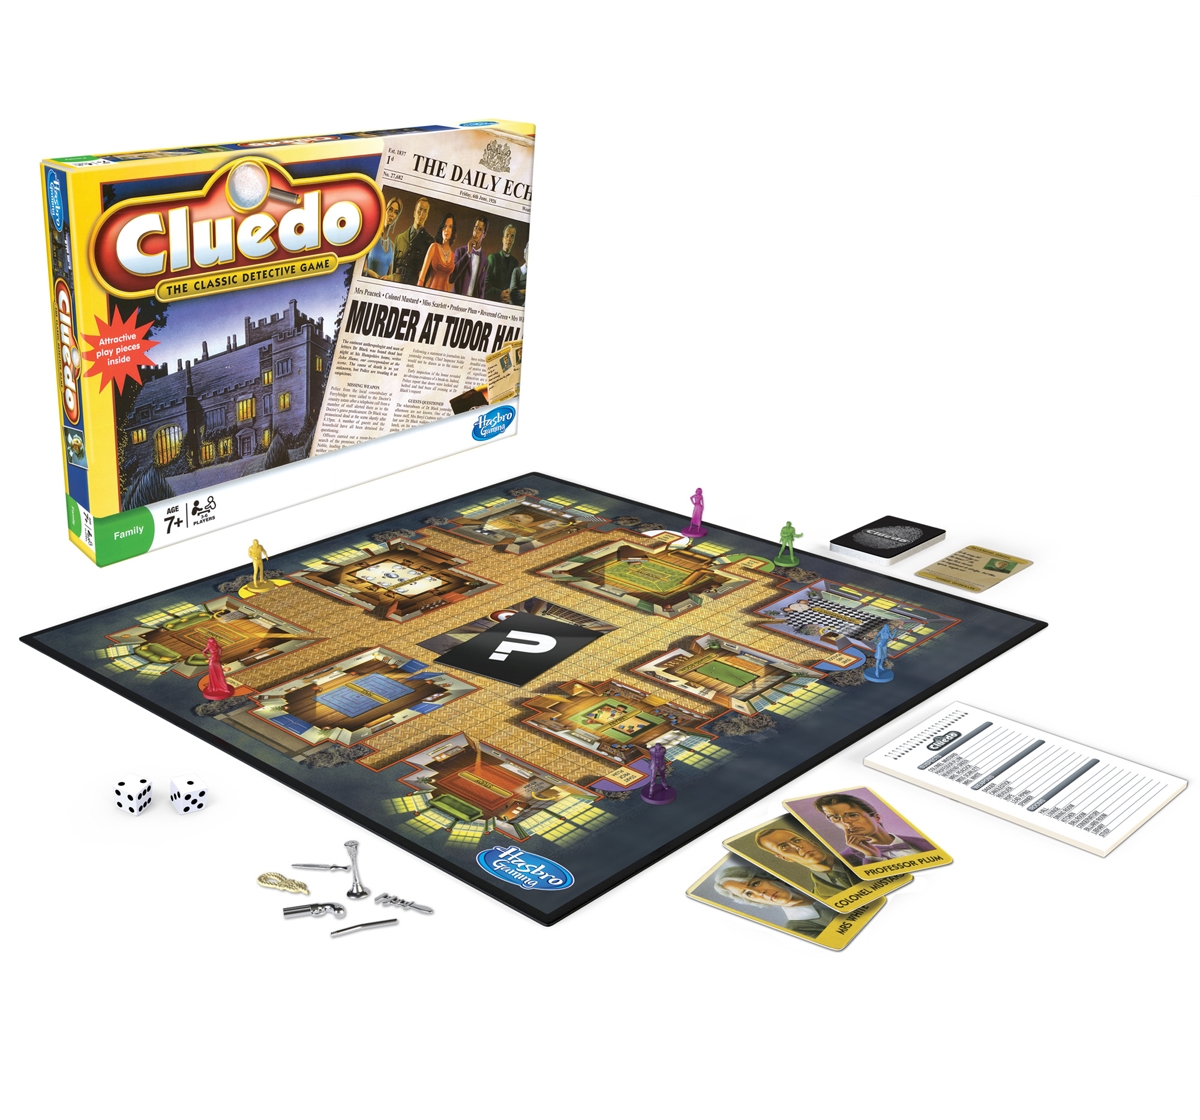 Hasbro Gaming | Hasbro Gaming Cluedo The Classic Detective Board Game For kids 7Y+, Multicolour